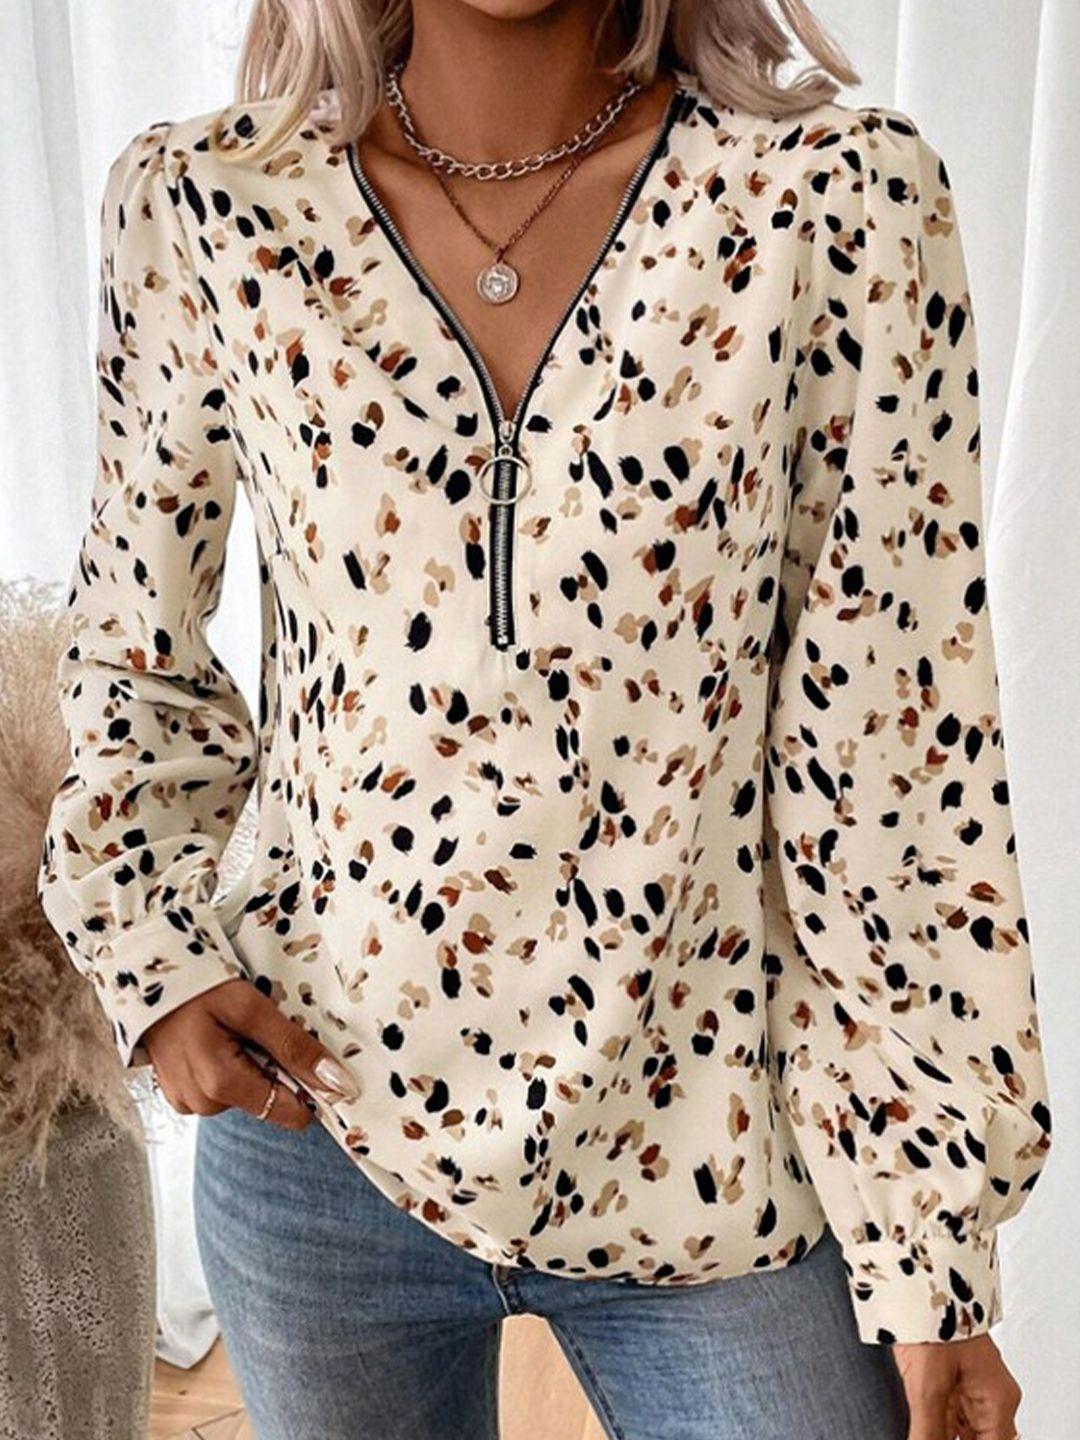 stylecast beige animal printed v-neck cuffed sleeves top